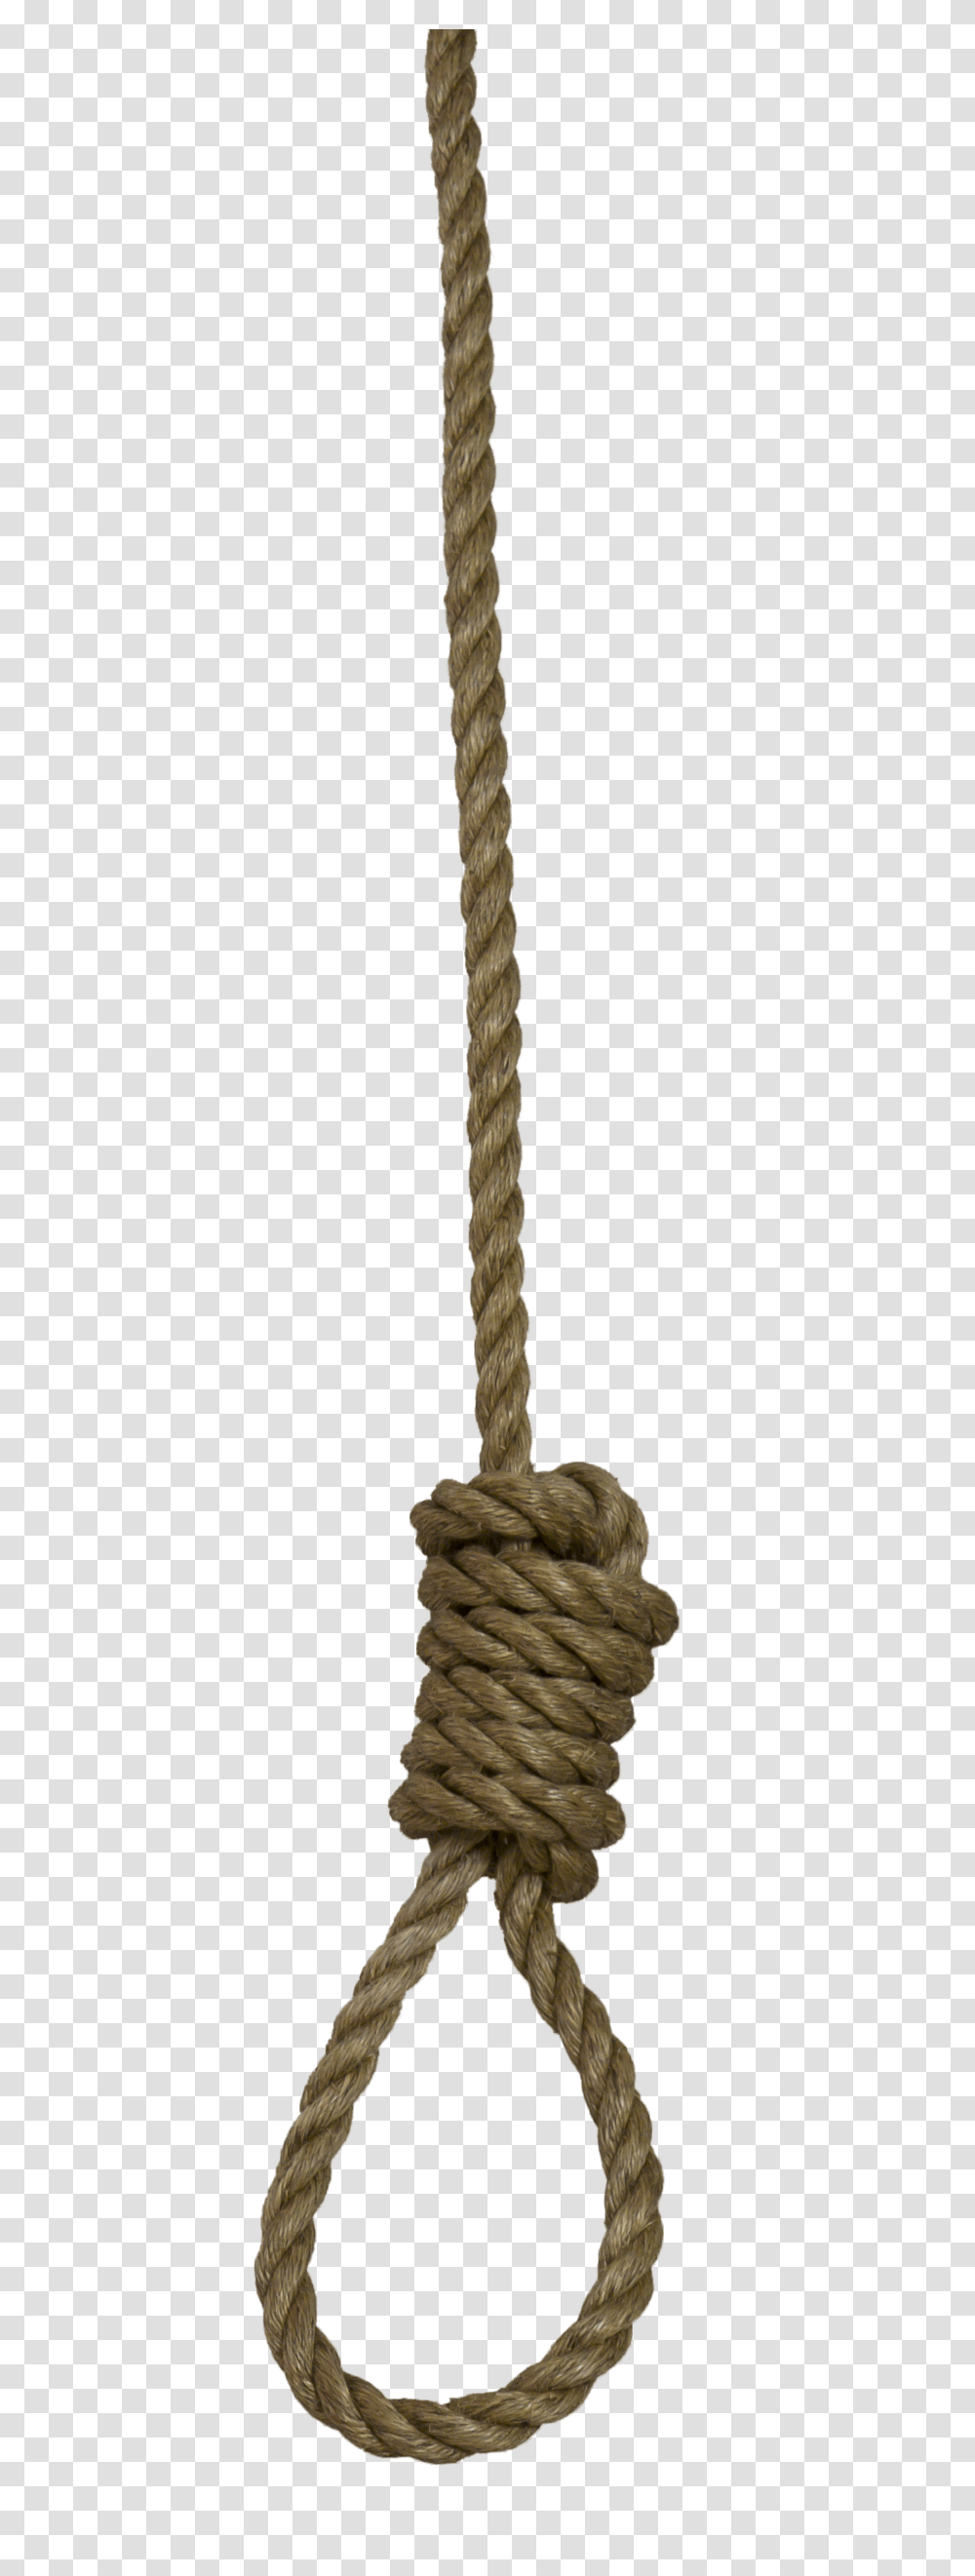 Rope Pictures, Knot Transparent Png